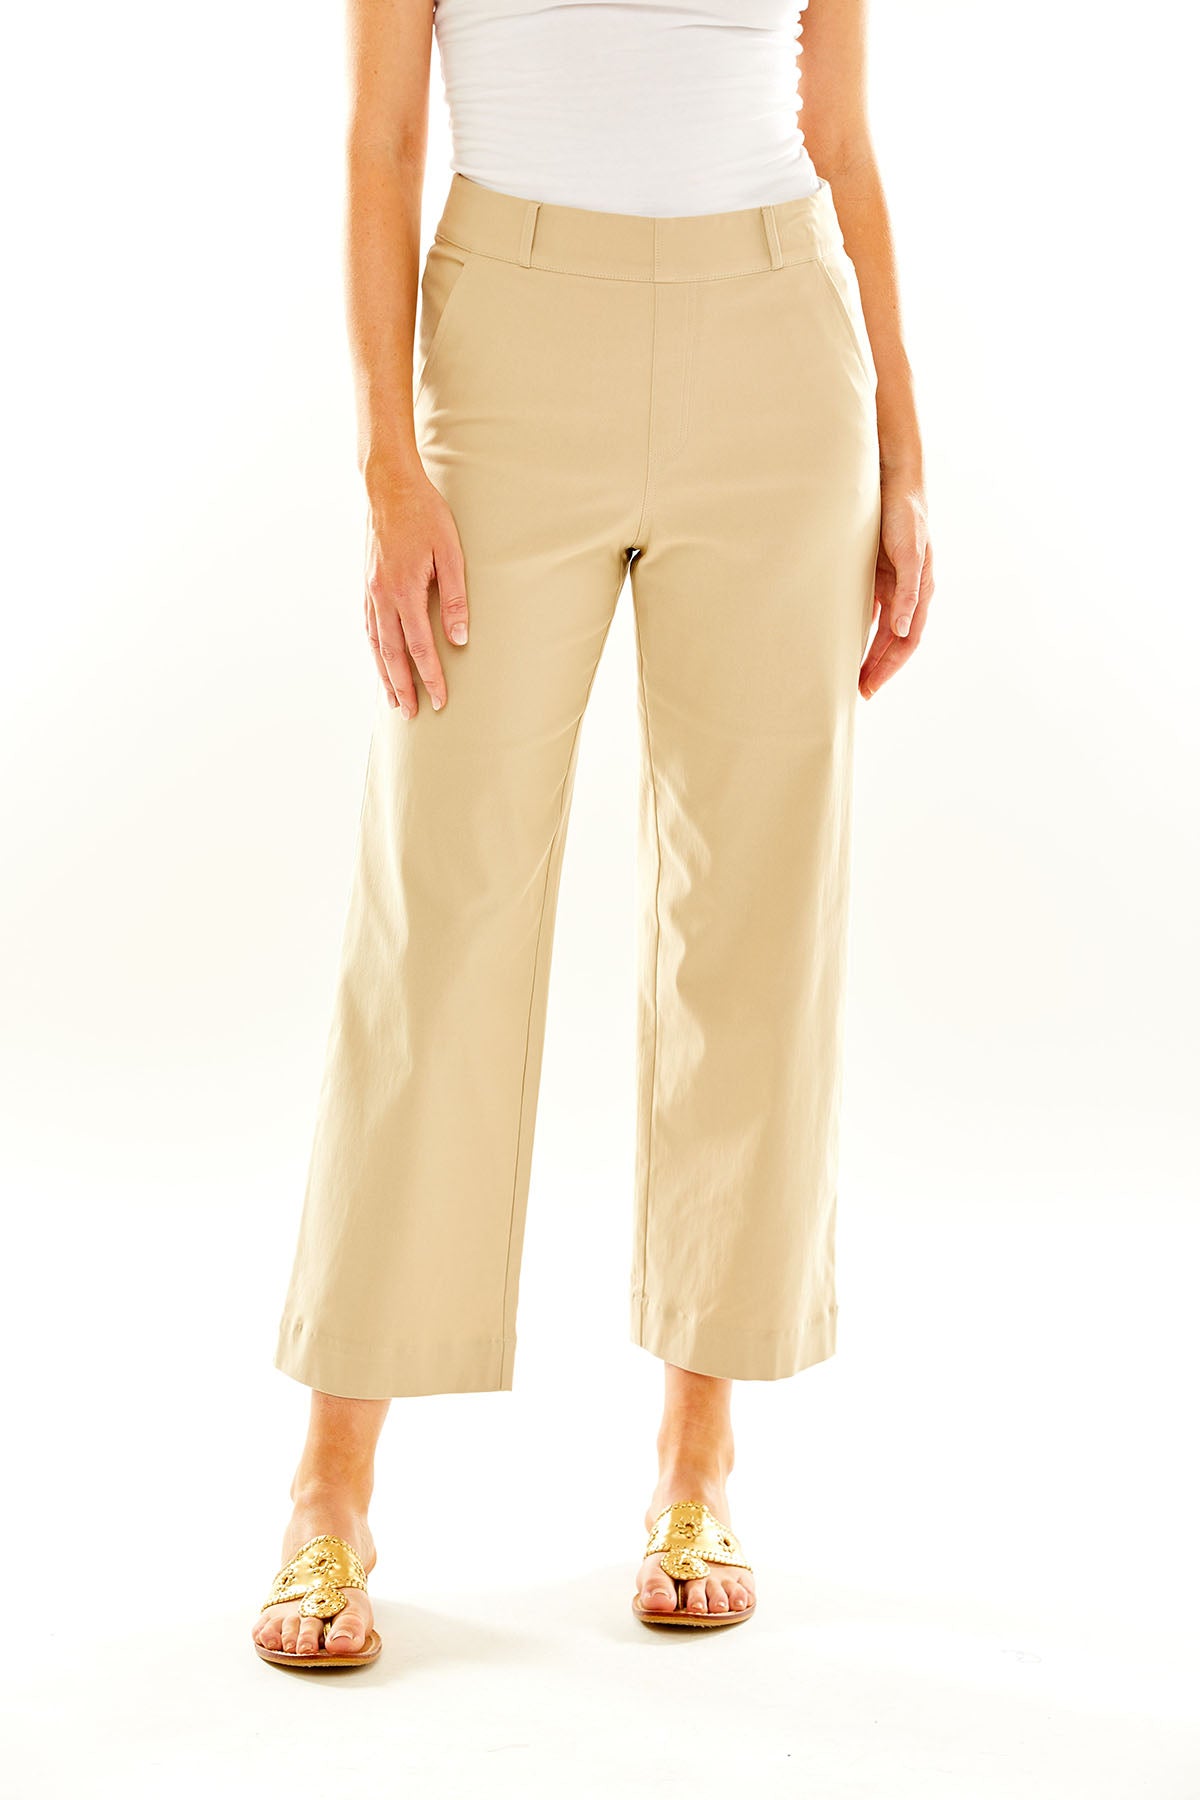 Woman in sand pants